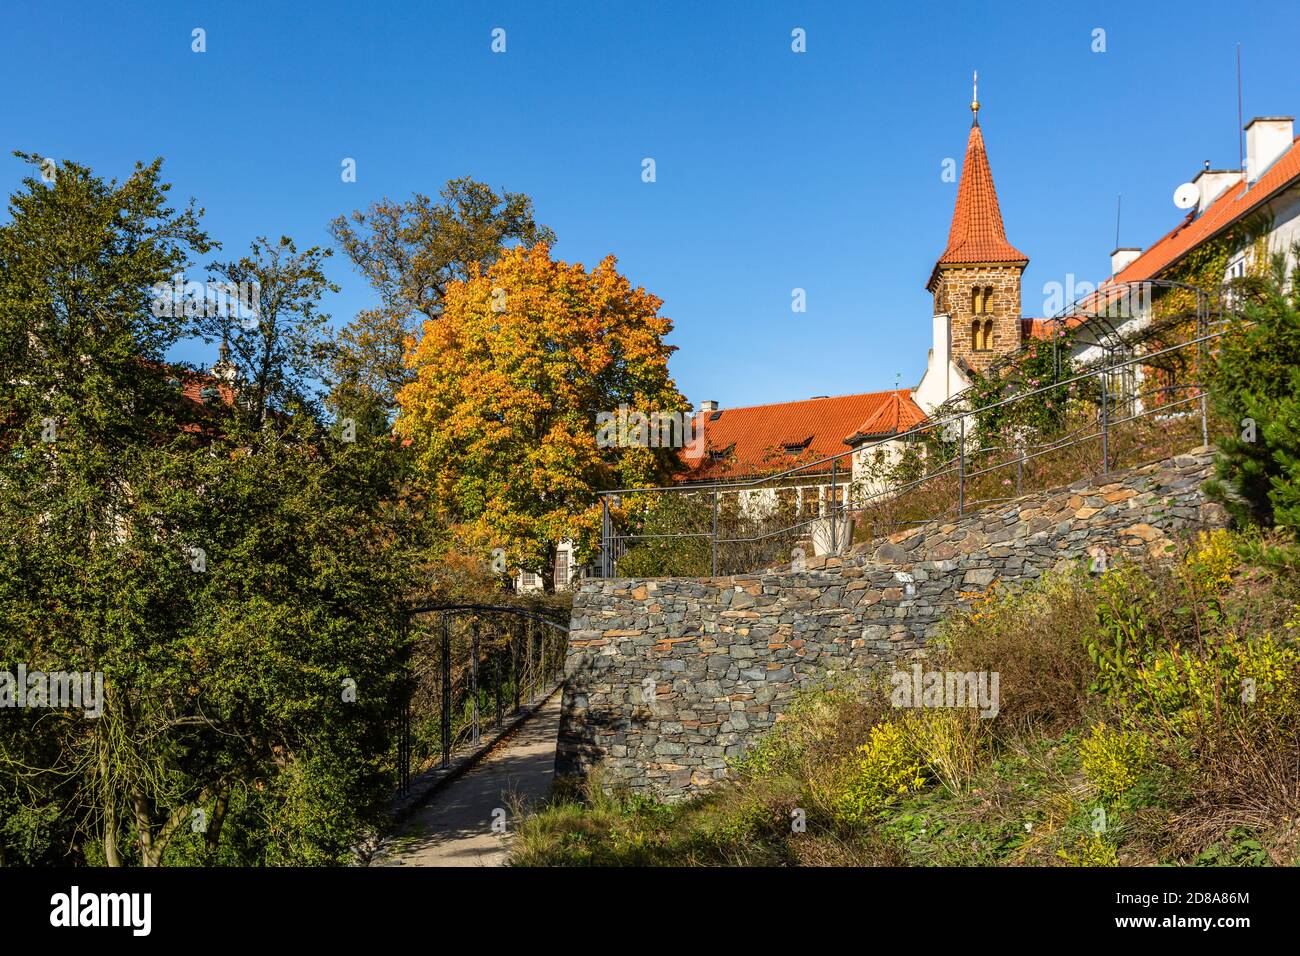 Pruhonice, Czech Republic - October 25 2020: View of the roman-gothic Church of the Birth of the Virgin Mary standing in a park with colorful trees. Stock Photo